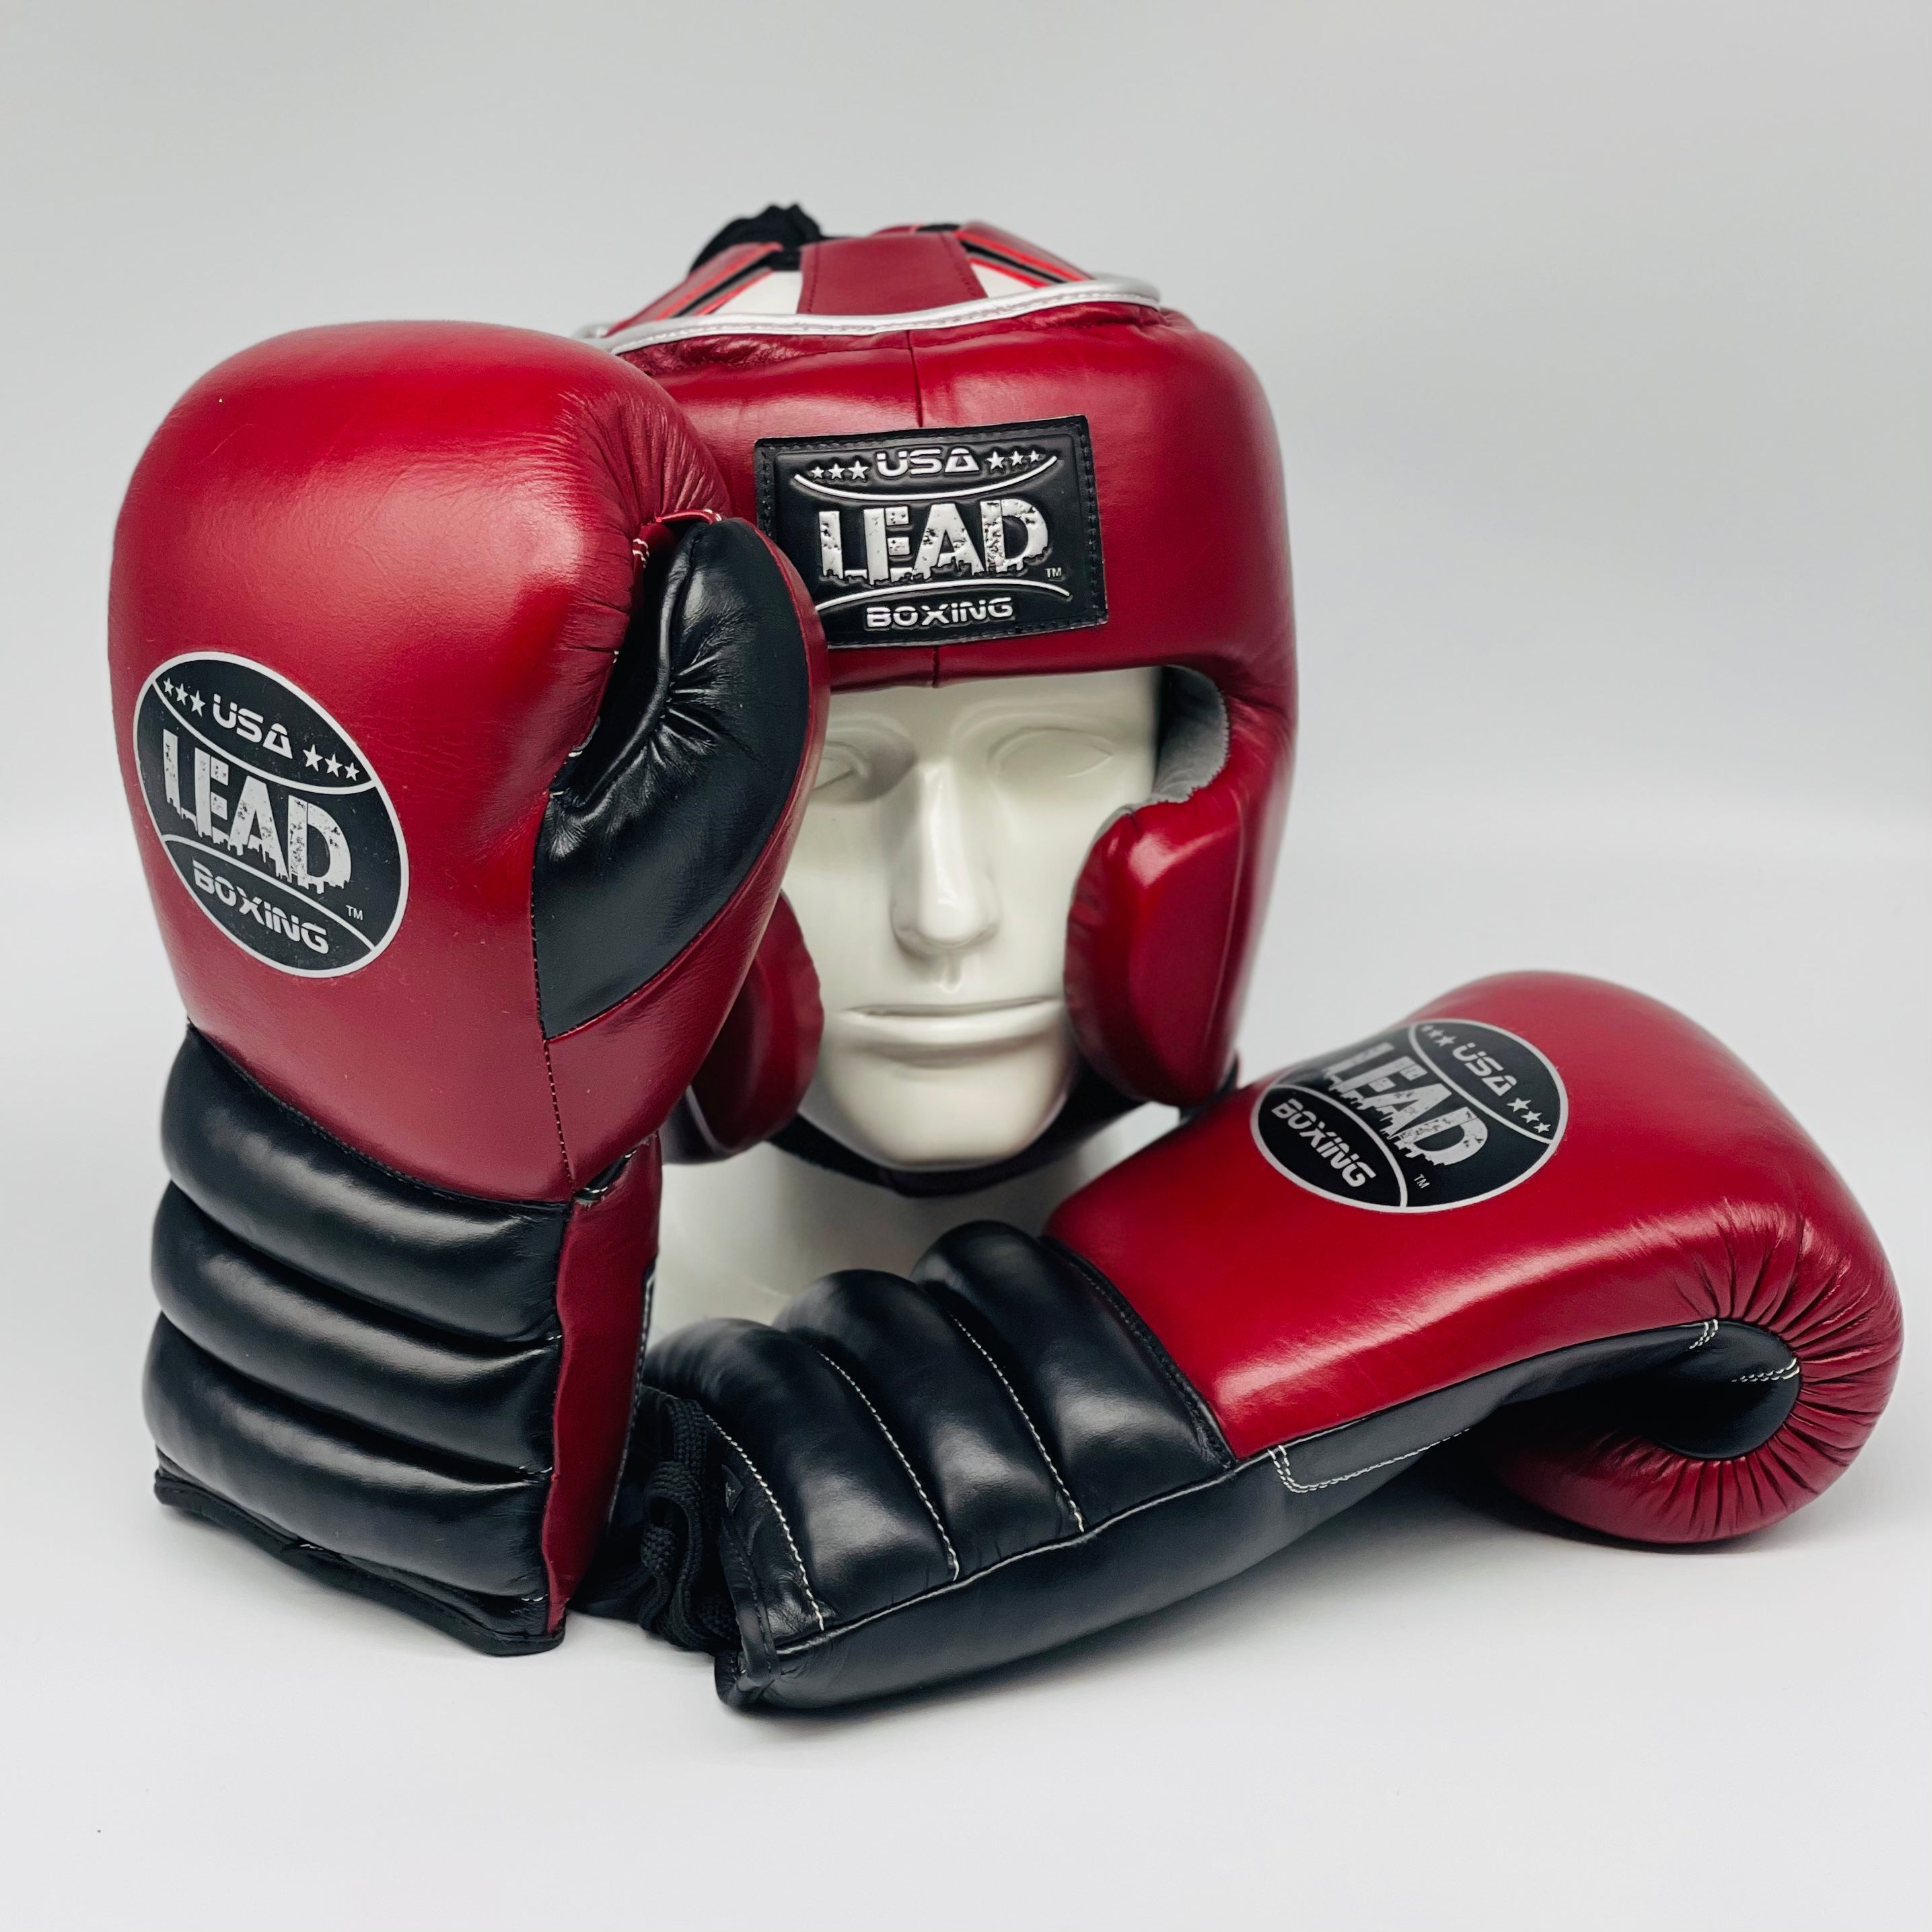 LEAD Boxing Sparring Set ( Maroon/Black/Silver)